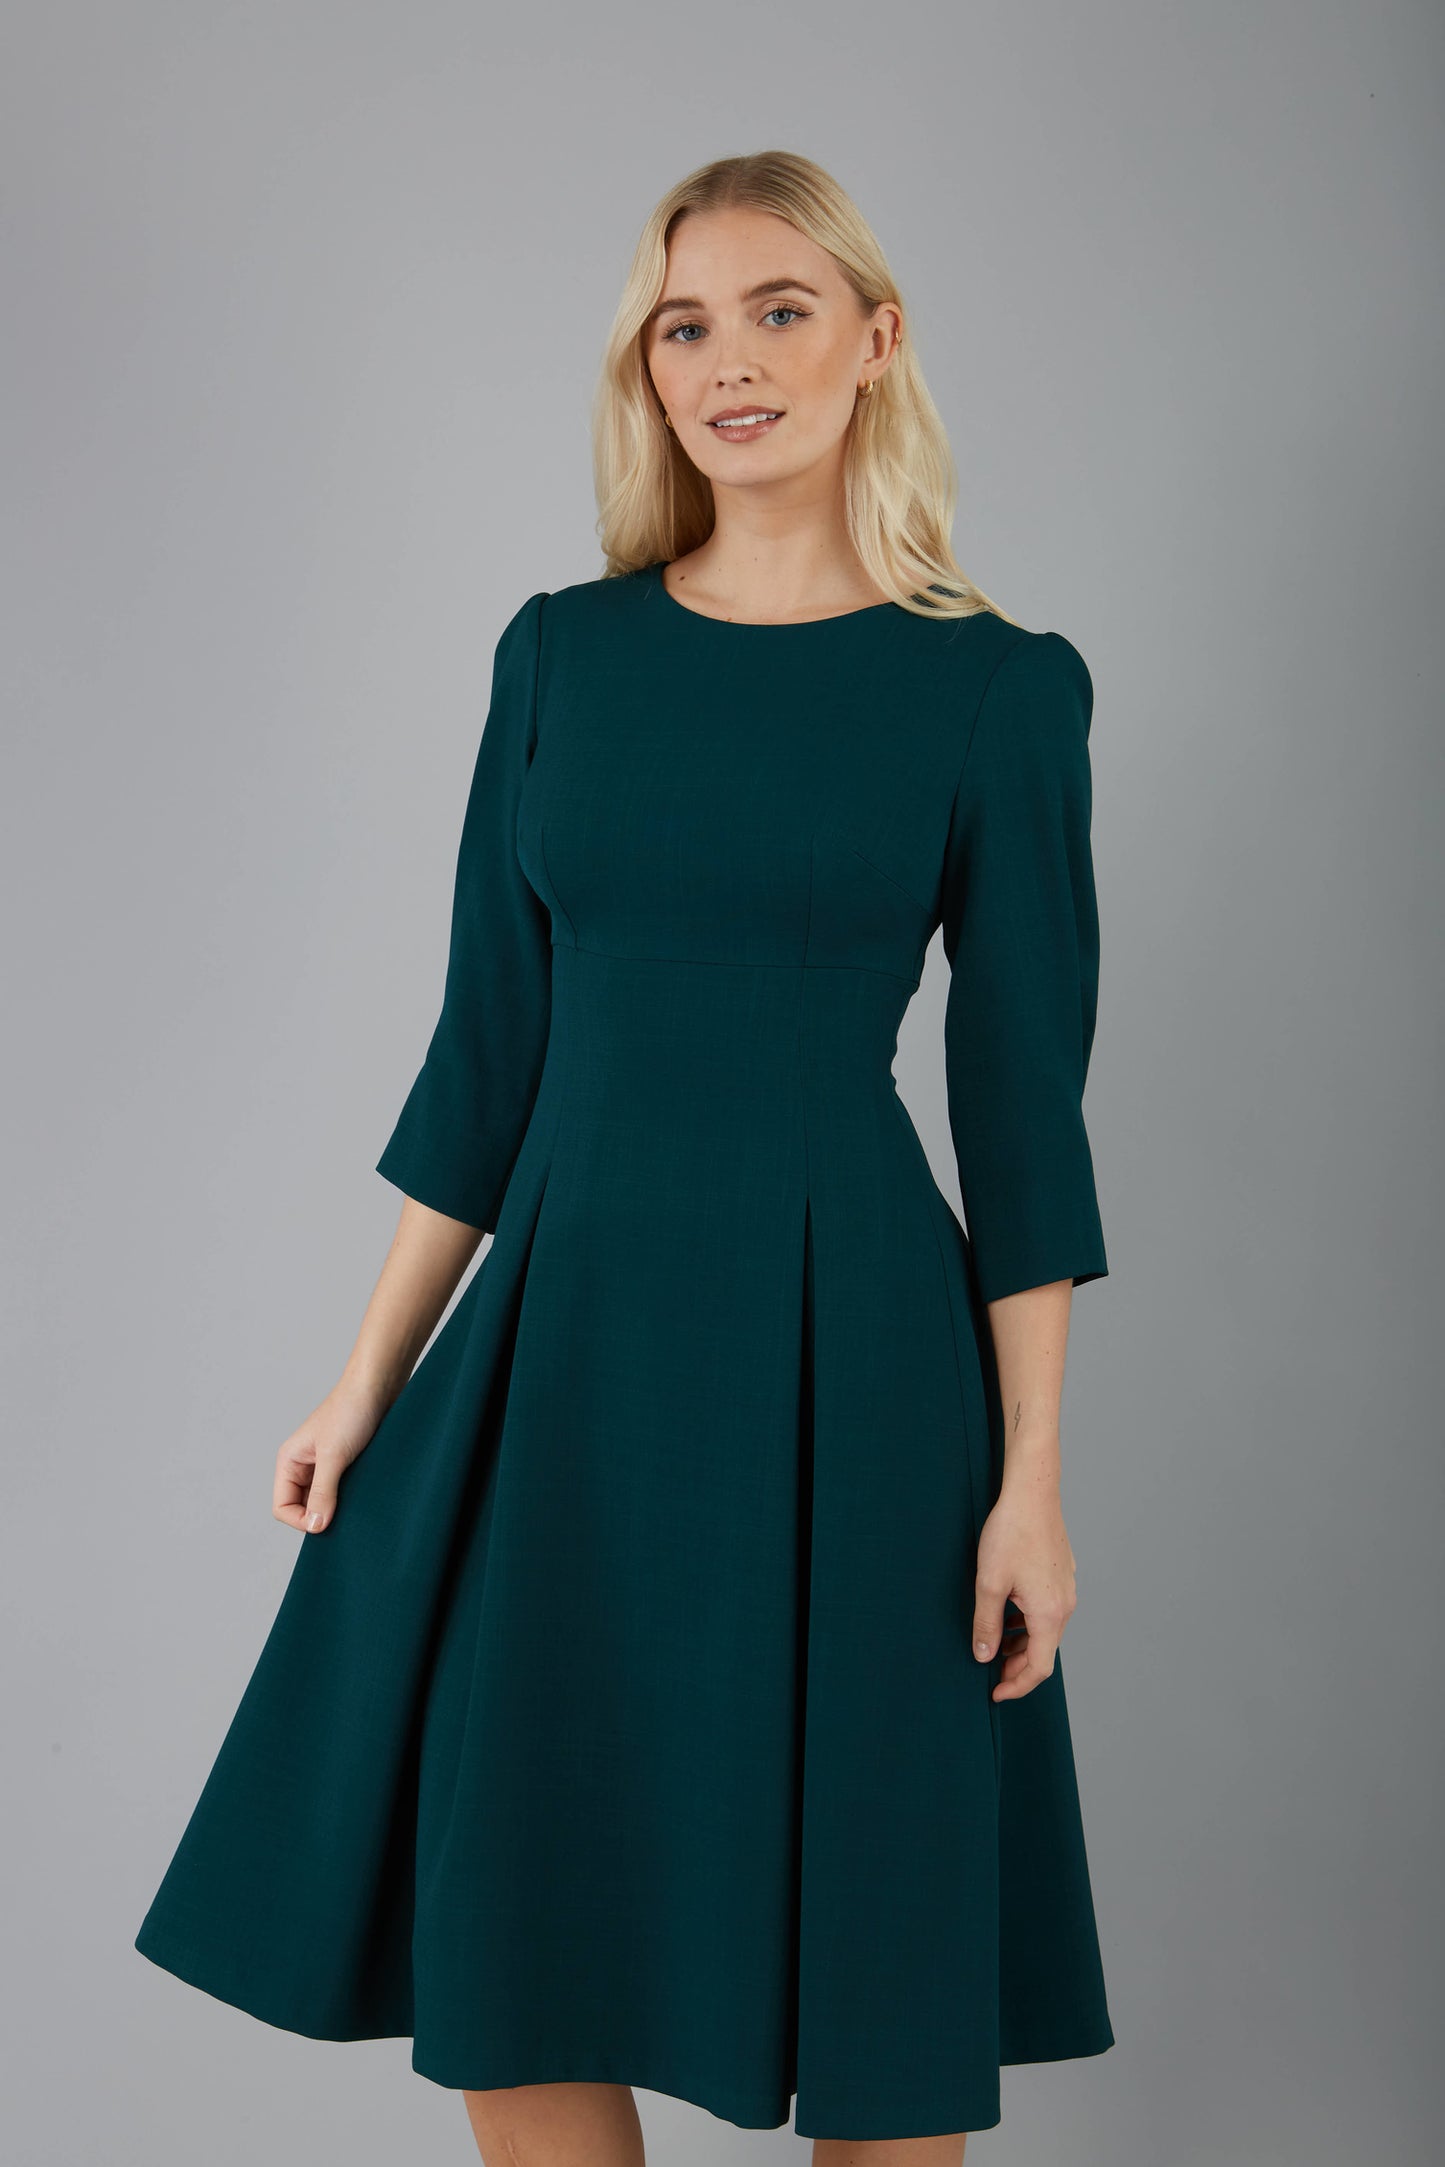 blonde model is wearing diva catwalk harpsden a-line skirt 3/4 sleeve swing dress with rounded neckline in forest green front